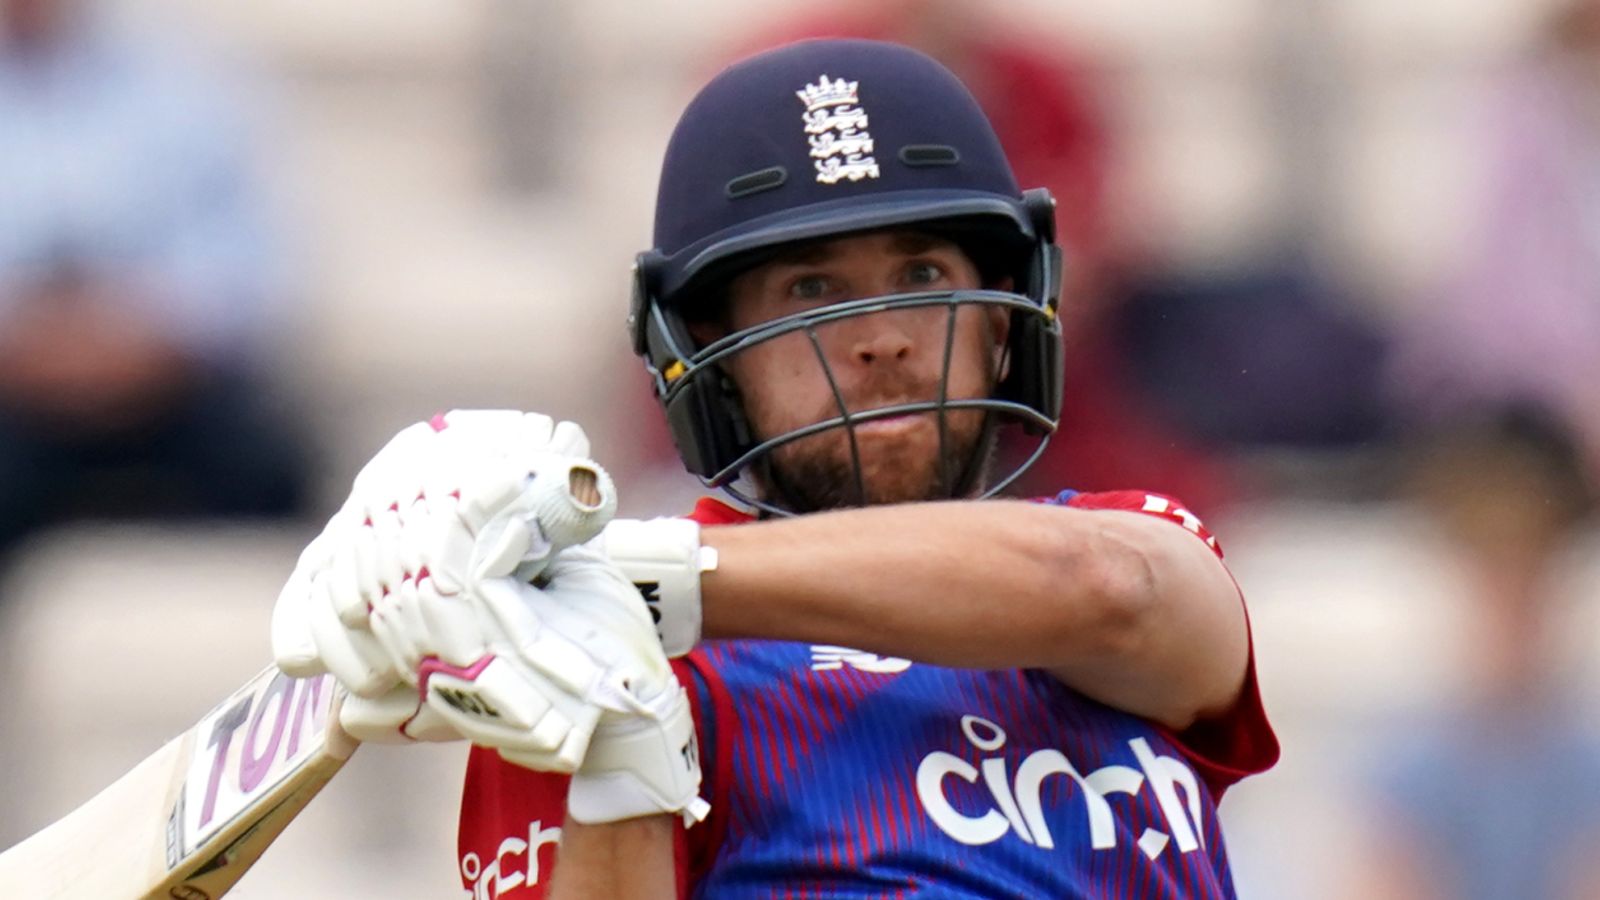 Dawid Malan hits 99 to power England to T20 clean sweep against